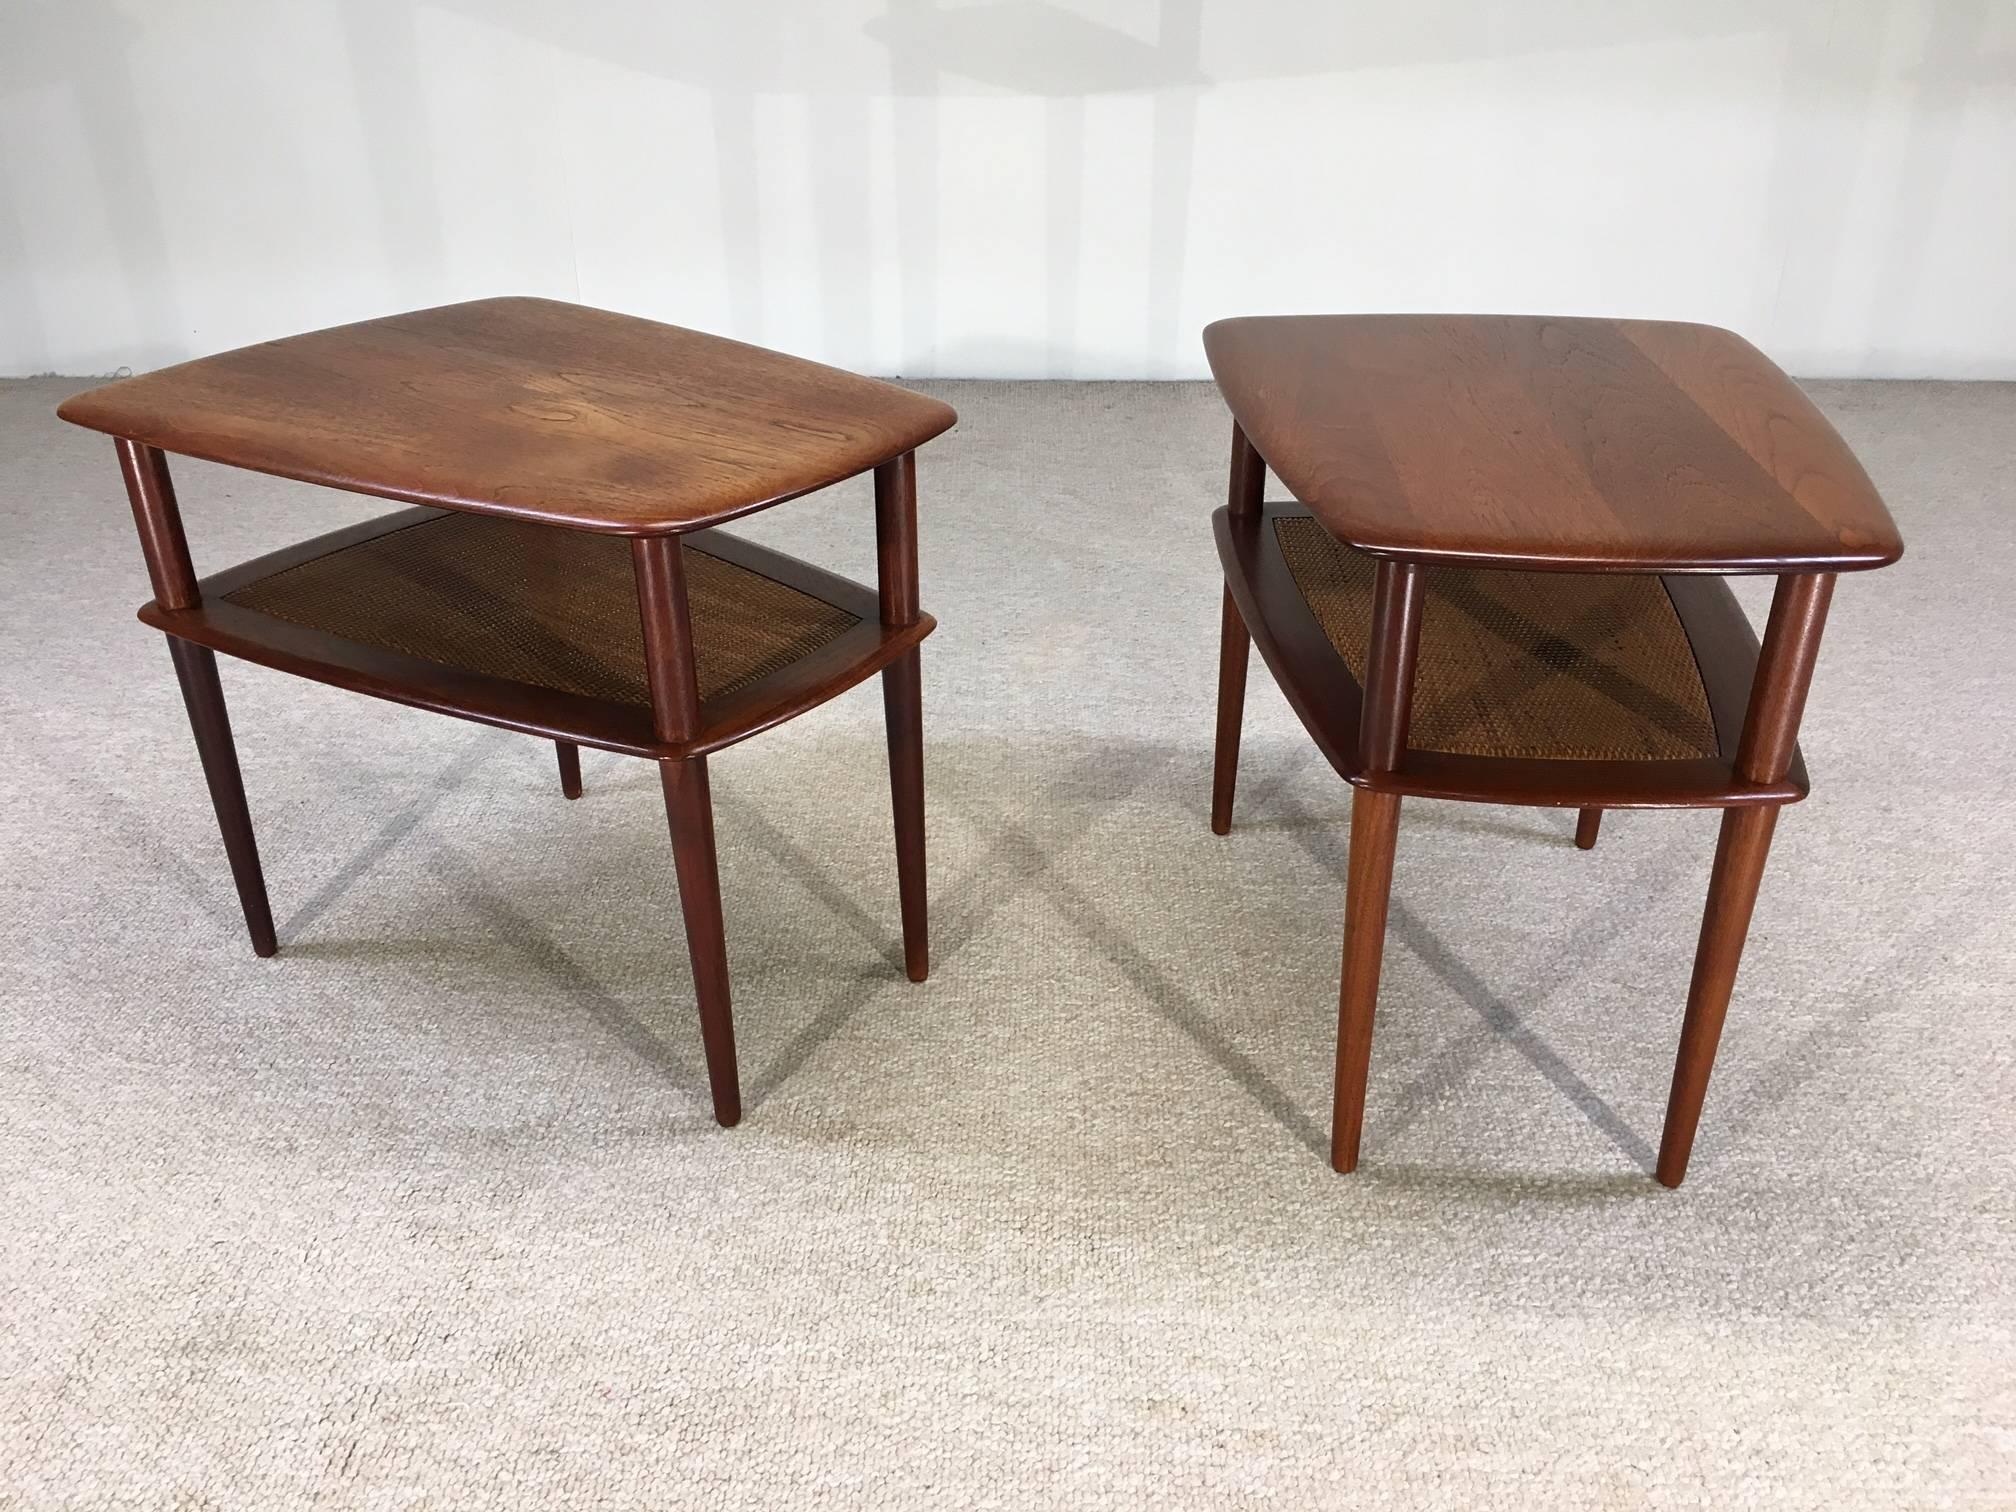 A beautiful three piece living room table set by Peter Hvidt and Orla Mølgaard Nielsen for Illums Bolighus and France & Sons.
We will separately sell the Minerva table and the side tables per buyers request. 

Minerva corner table dimensions